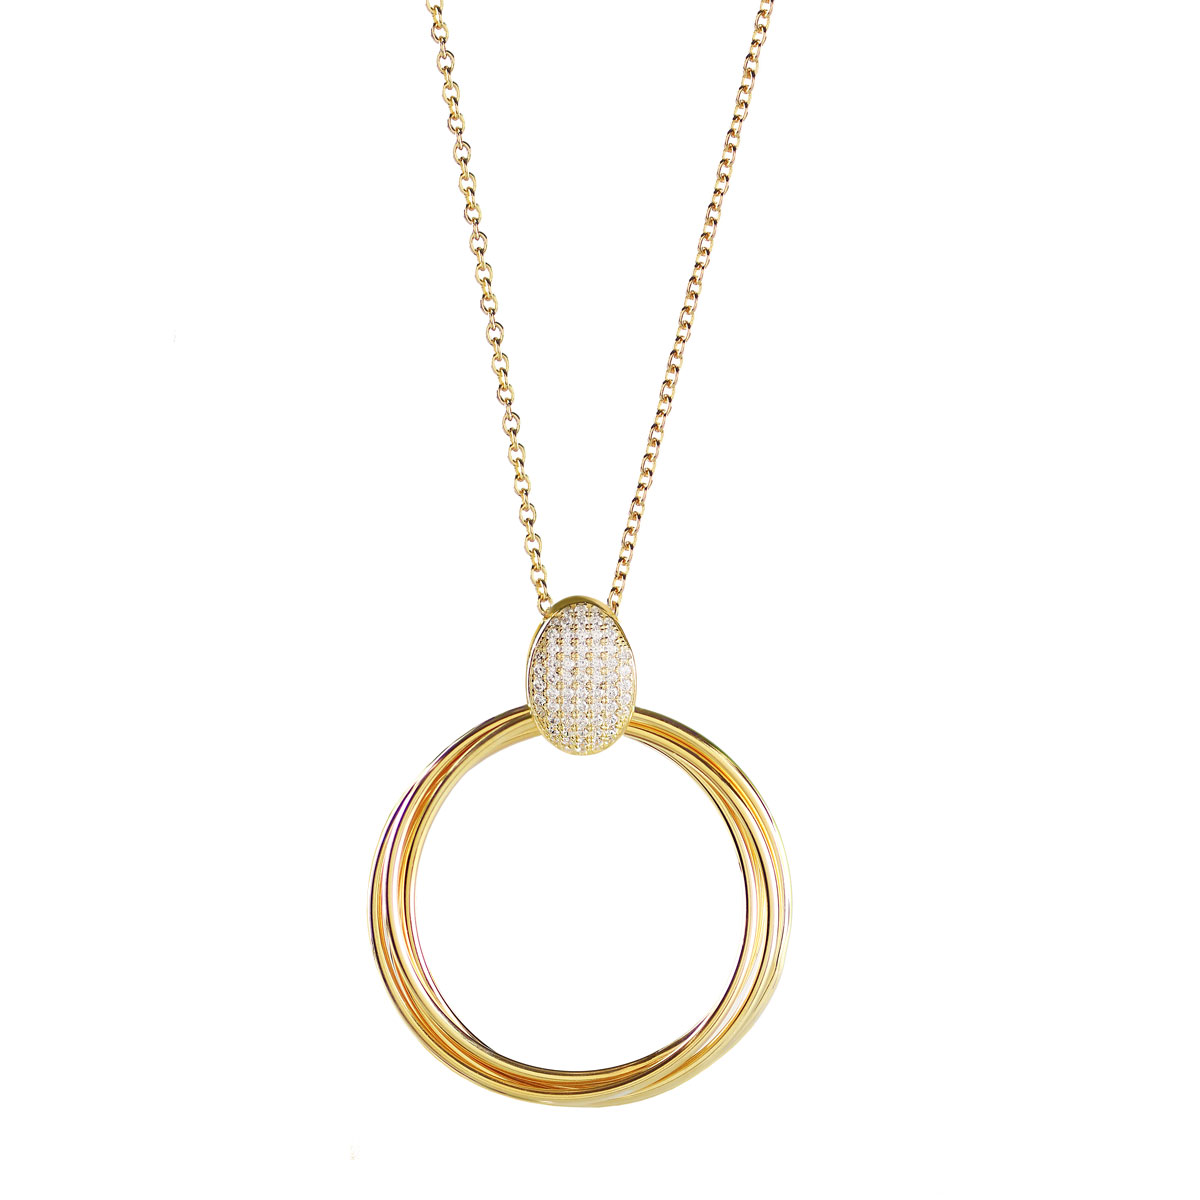 Cashs Ireland, Twist Gold and Pave Pendant Necklace